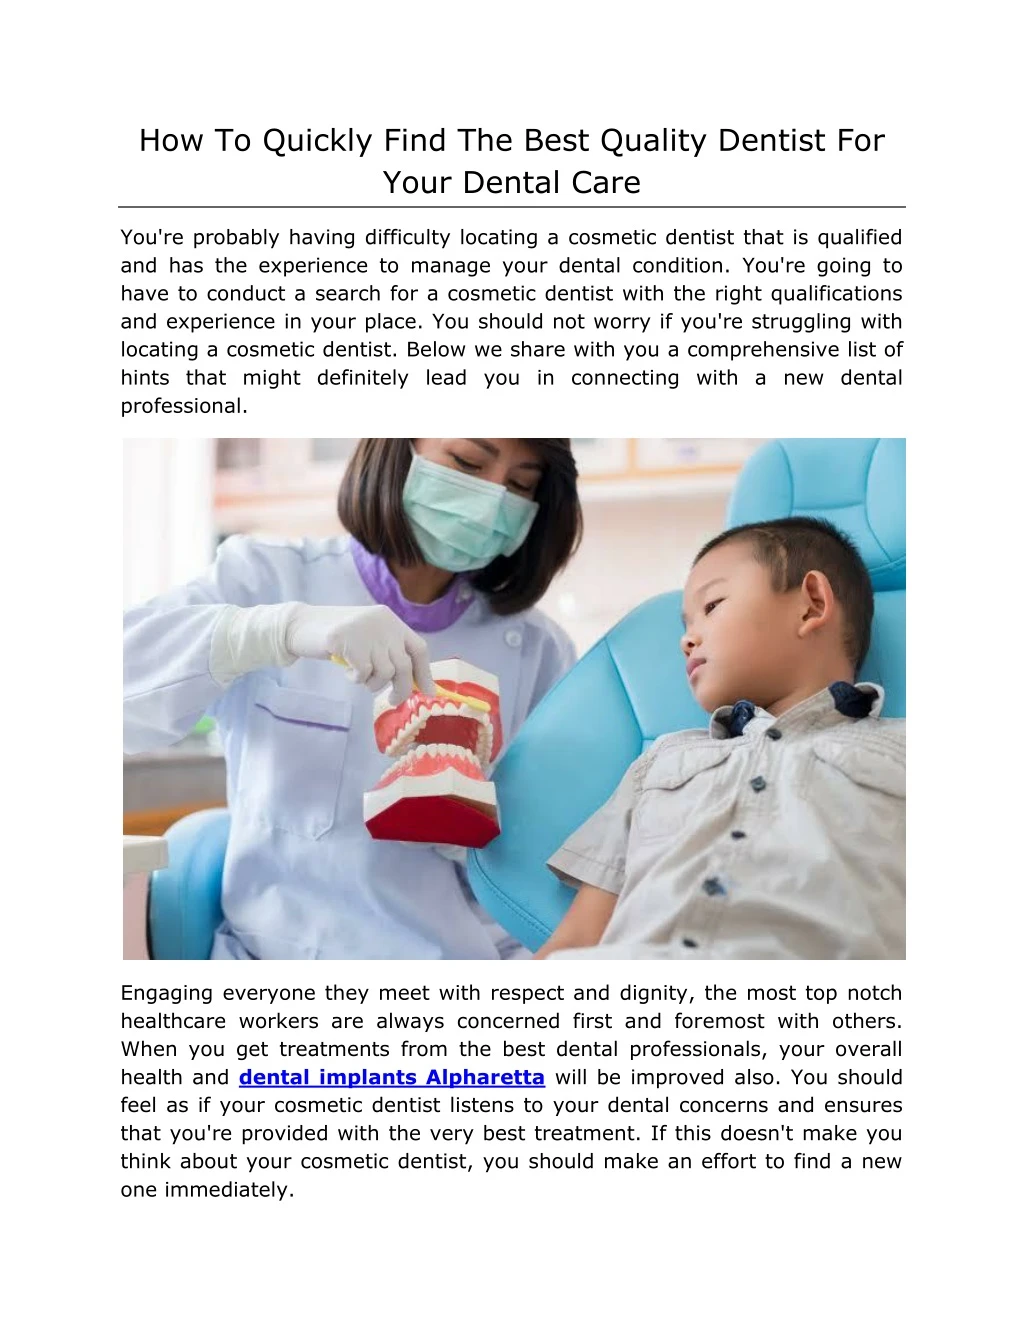 how to quickly find the best quality dentist